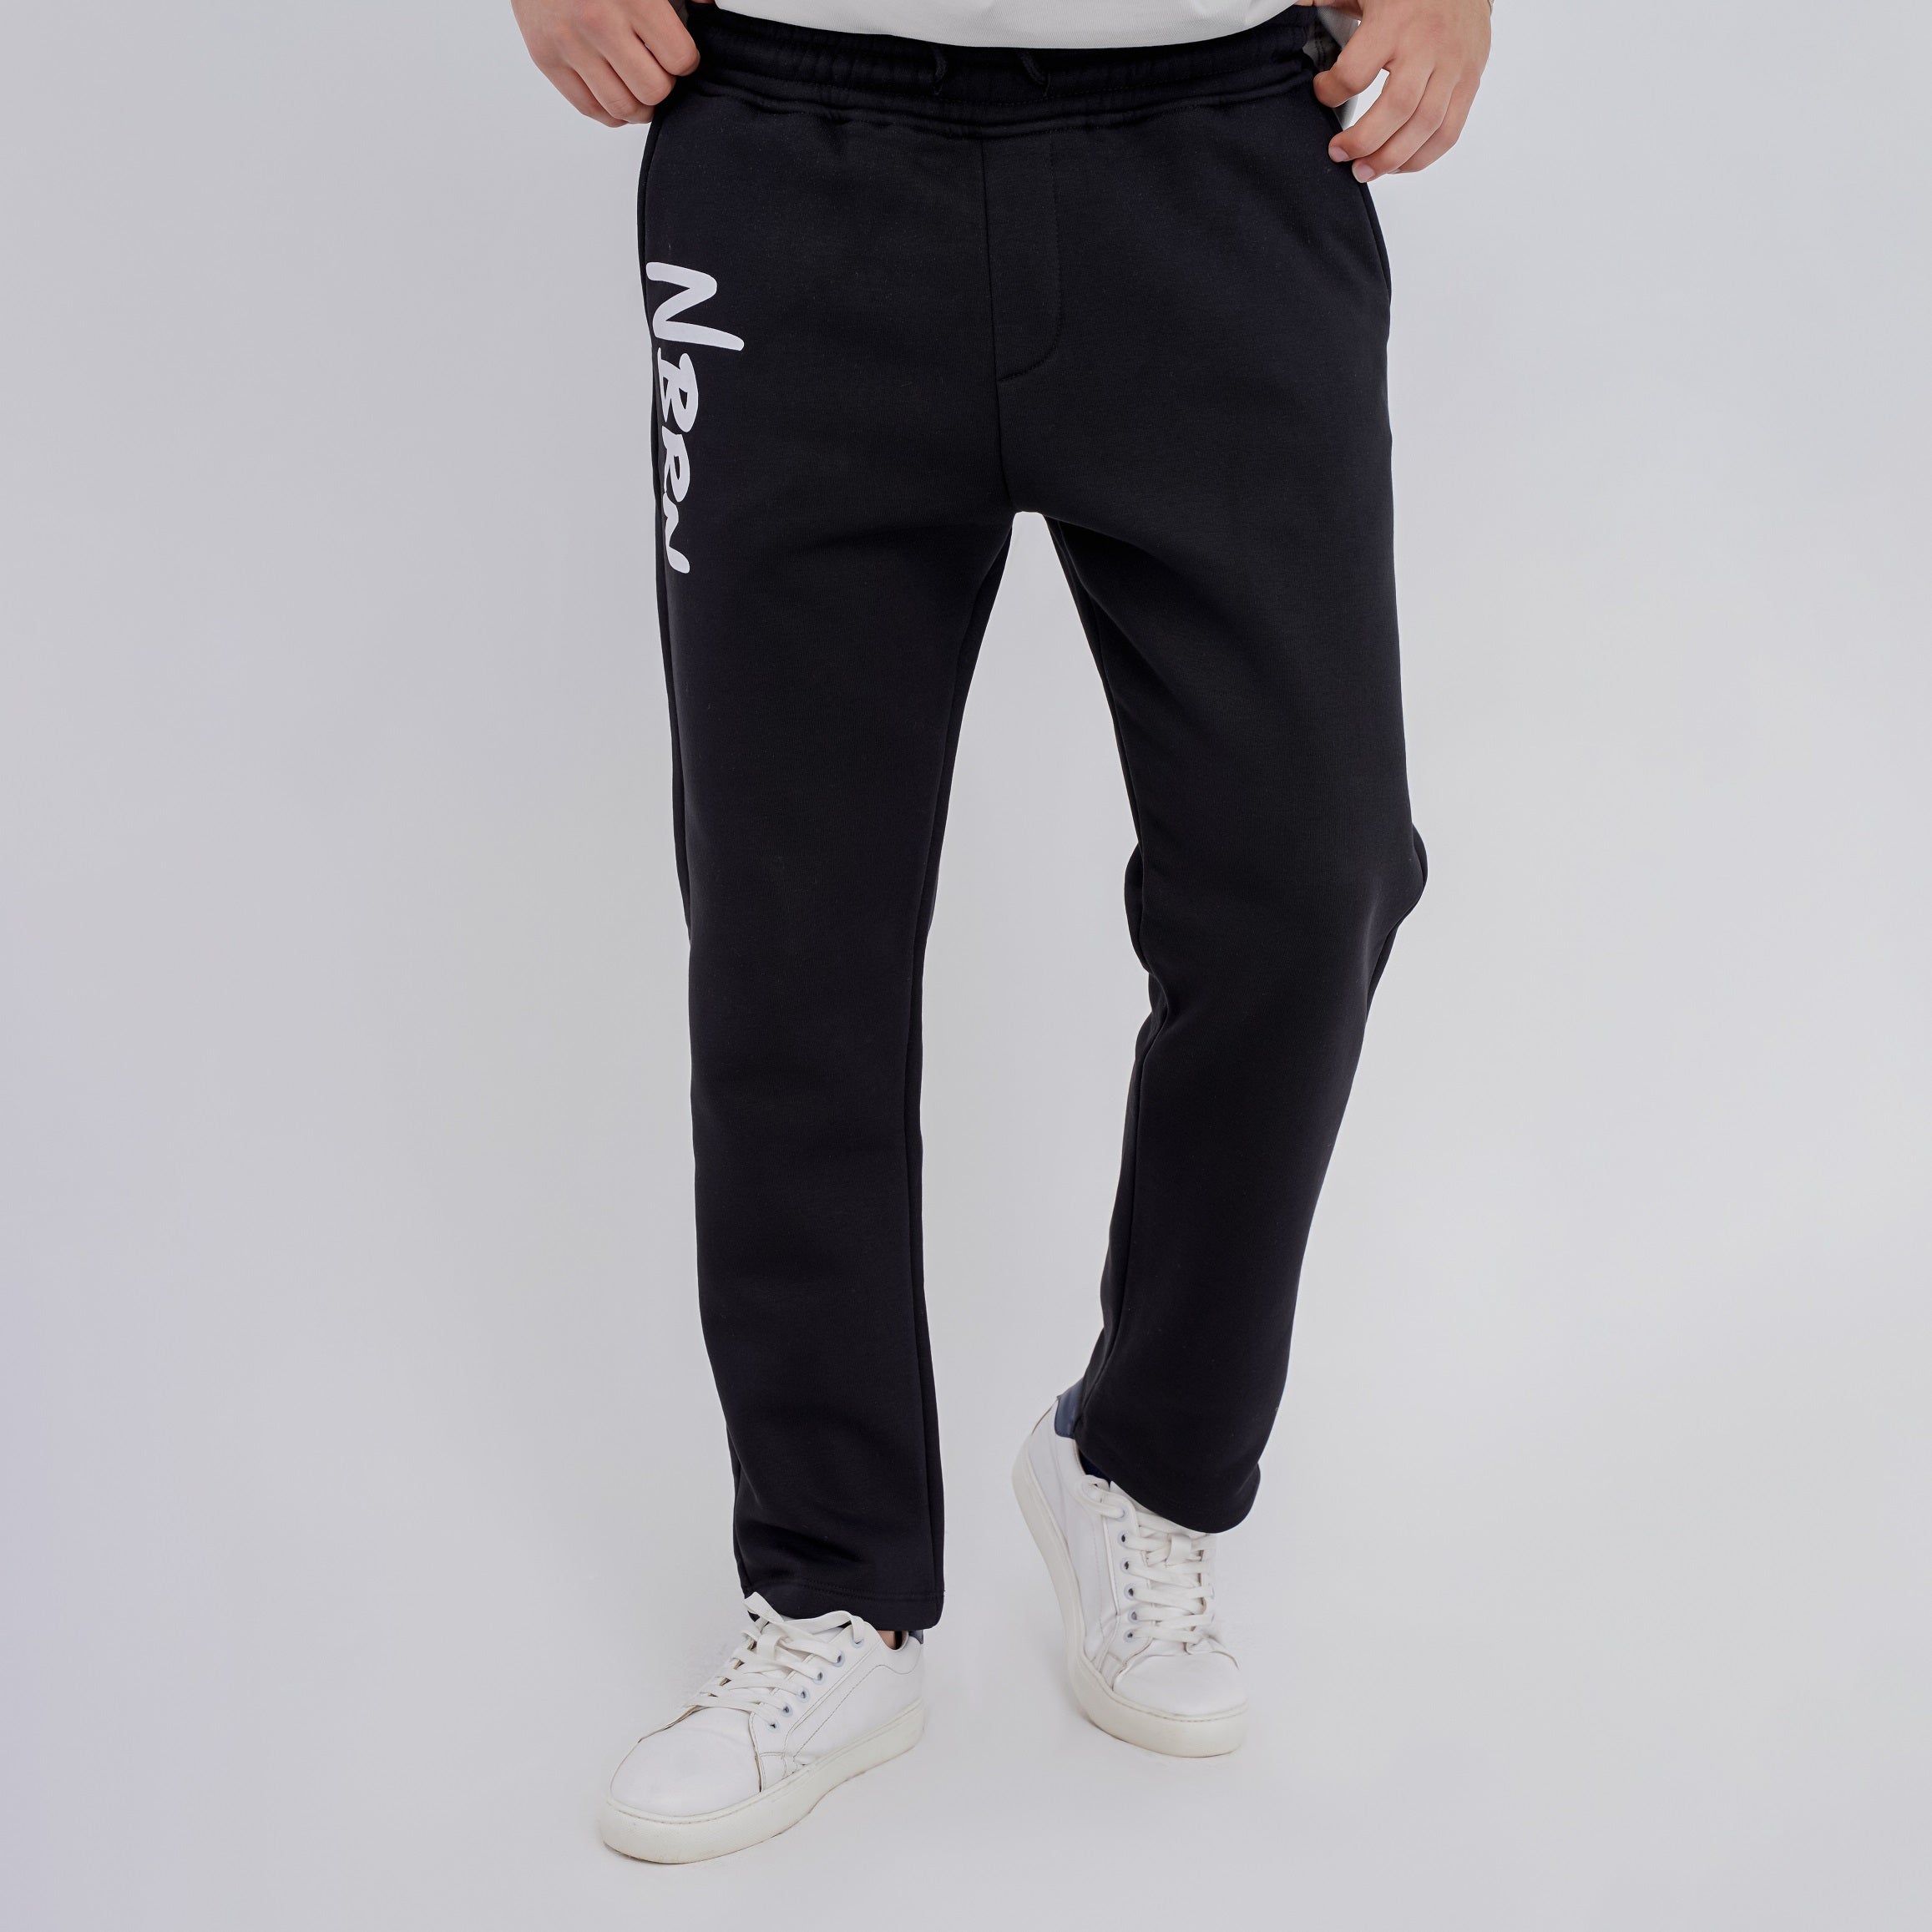 M24NT902-Sporty Sweatpants With drawstring